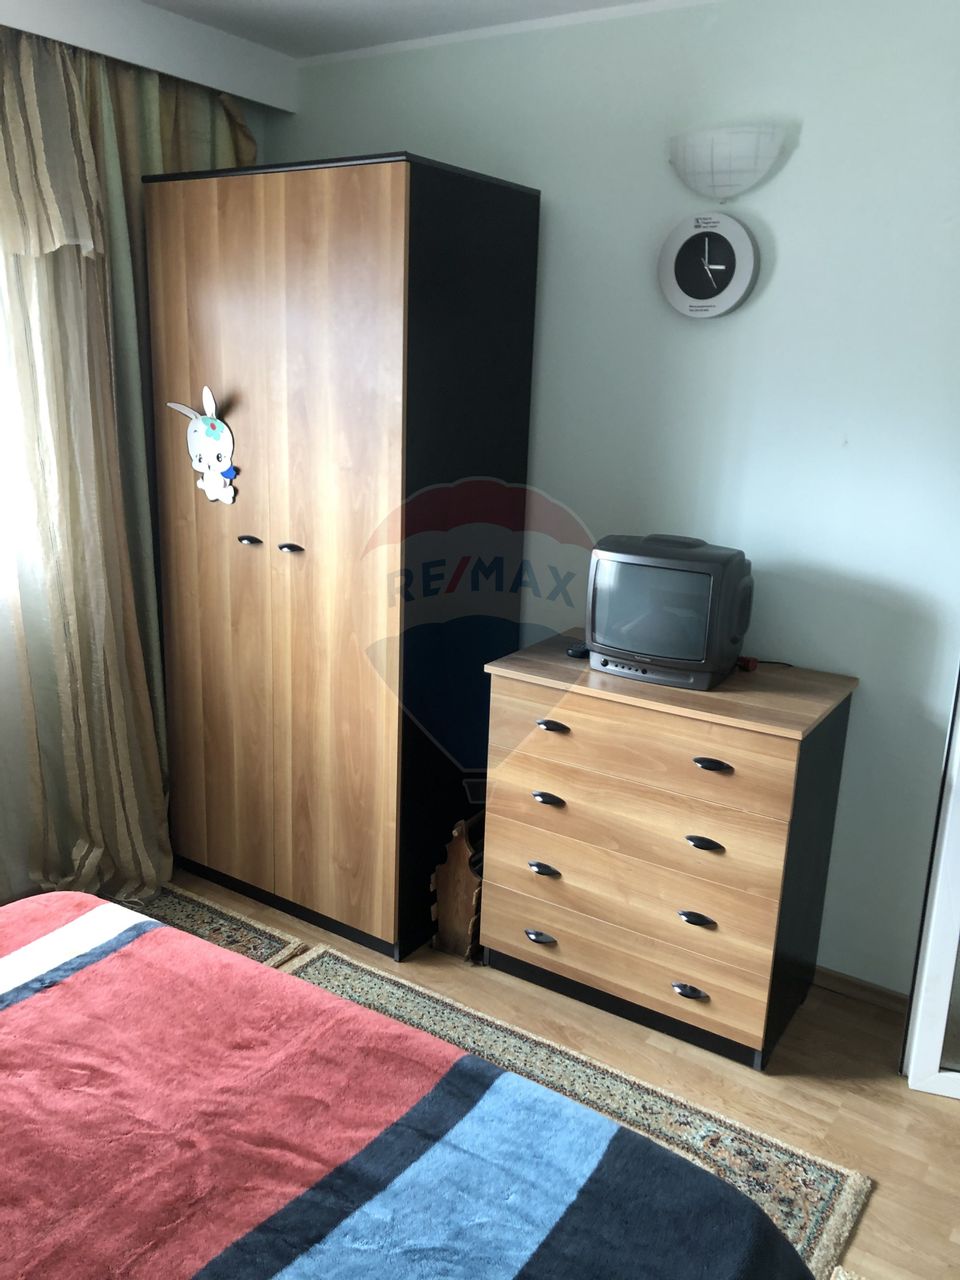 4 room Apartment for rent, Sud area